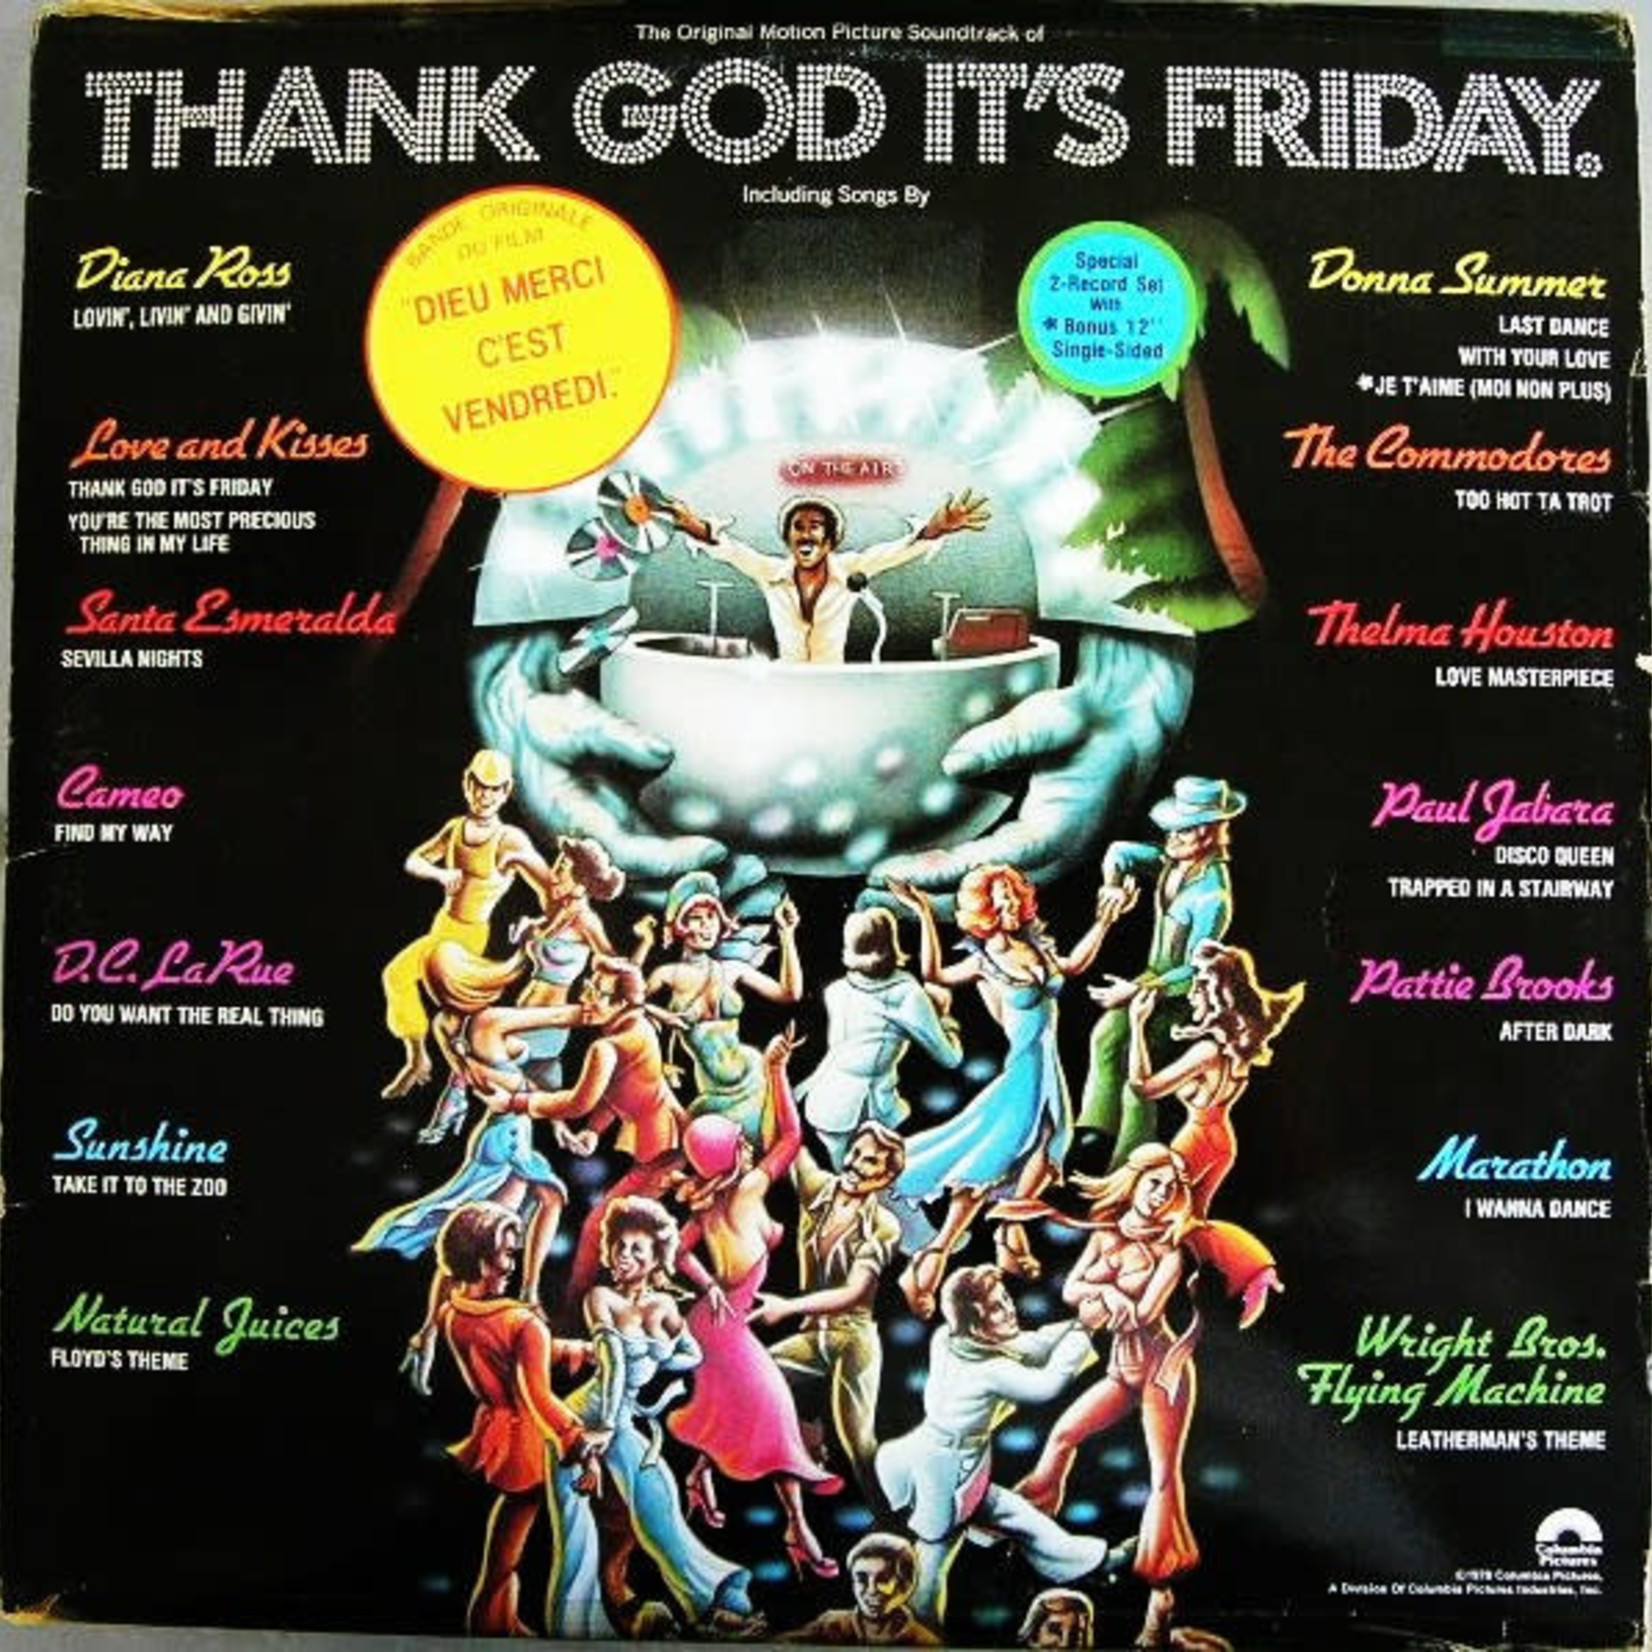 V/A – Thank God It's Friday (The Original Motion Picture Soundtrack)